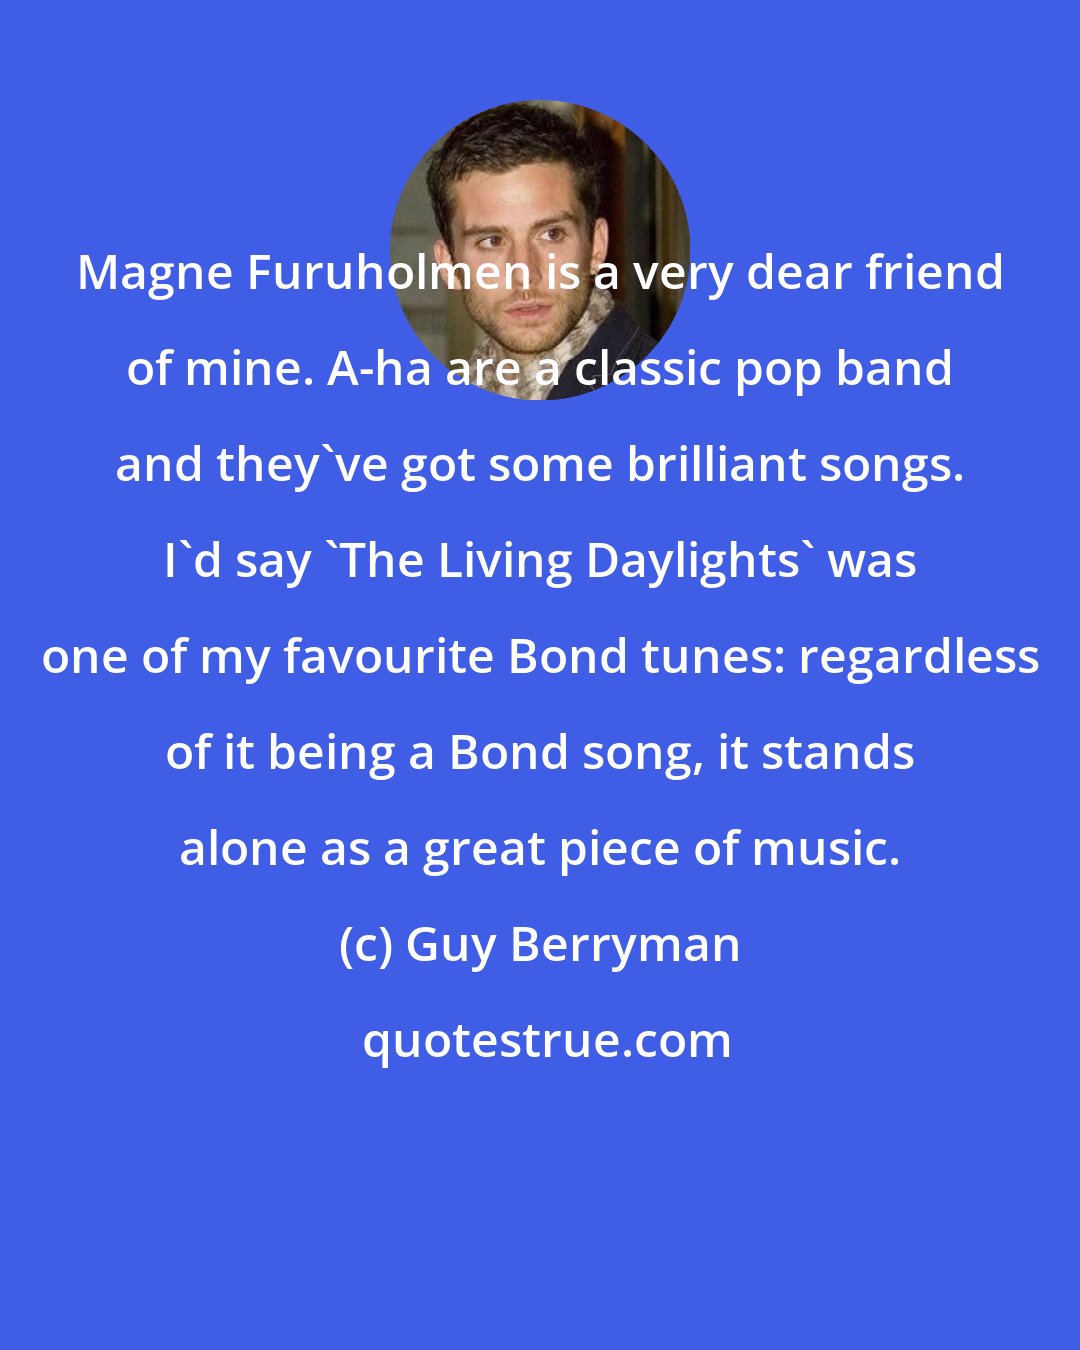 Guy Berryman: Magne Furuholmen is a very dear friend of mine. A-ha are a classic pop band and they've got some brilliant songs. I'd say 'The Living Daylights' was one of my favourite Bond tunes: regardless of it being a Bond song, it stands alone as a great piece of music.